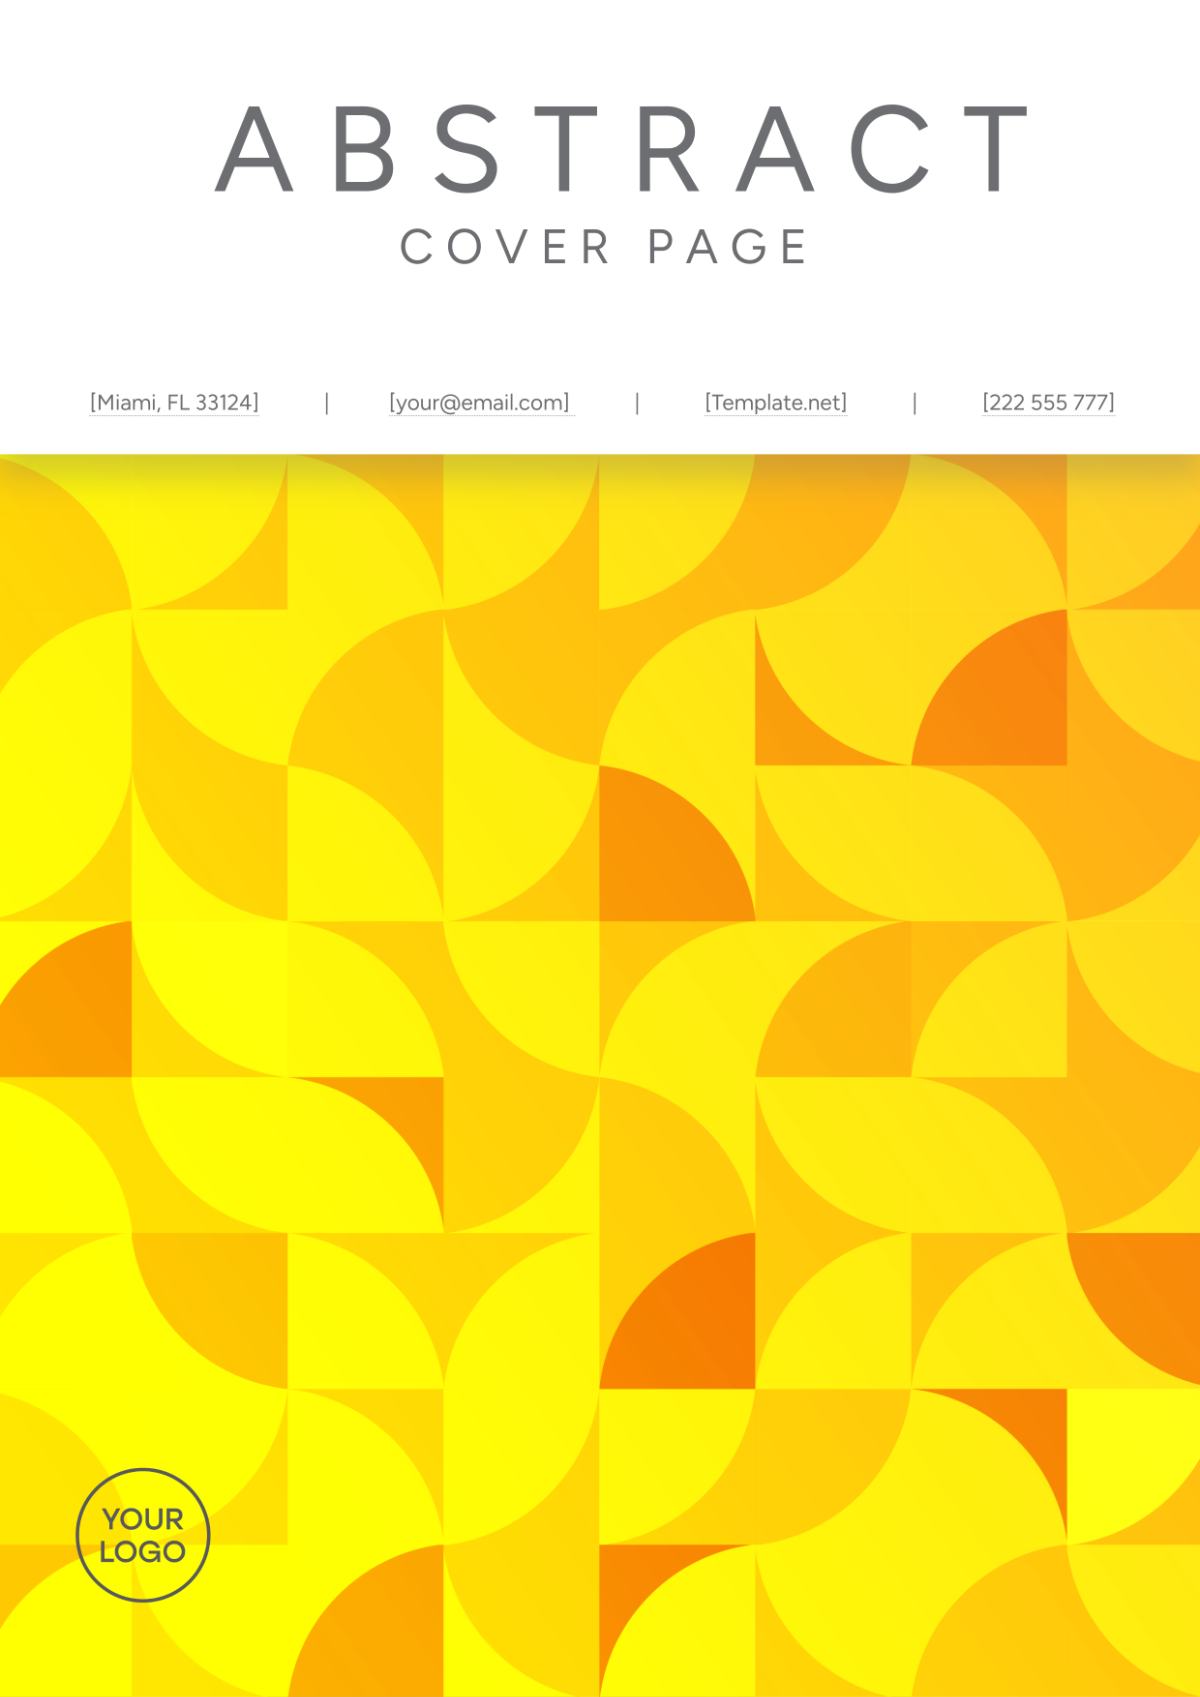 Abstract Cover Page Image